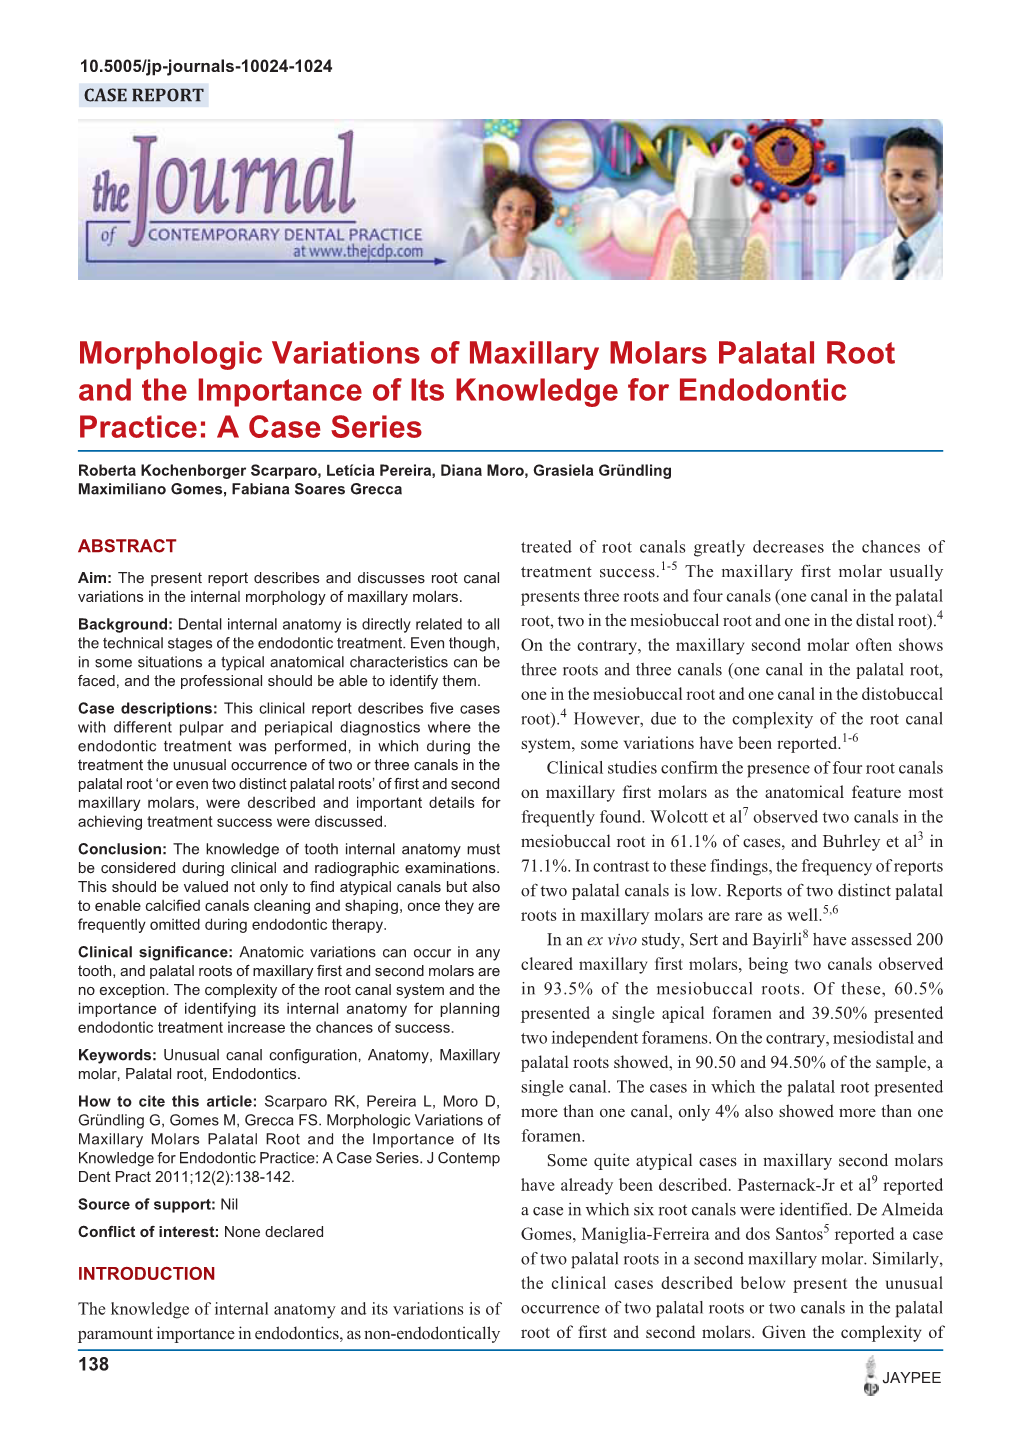 Morphologic Variations of Maxillary Molars Palatal Root and the Importance of Its Knowledge for Endodontic Practice: a Case Series